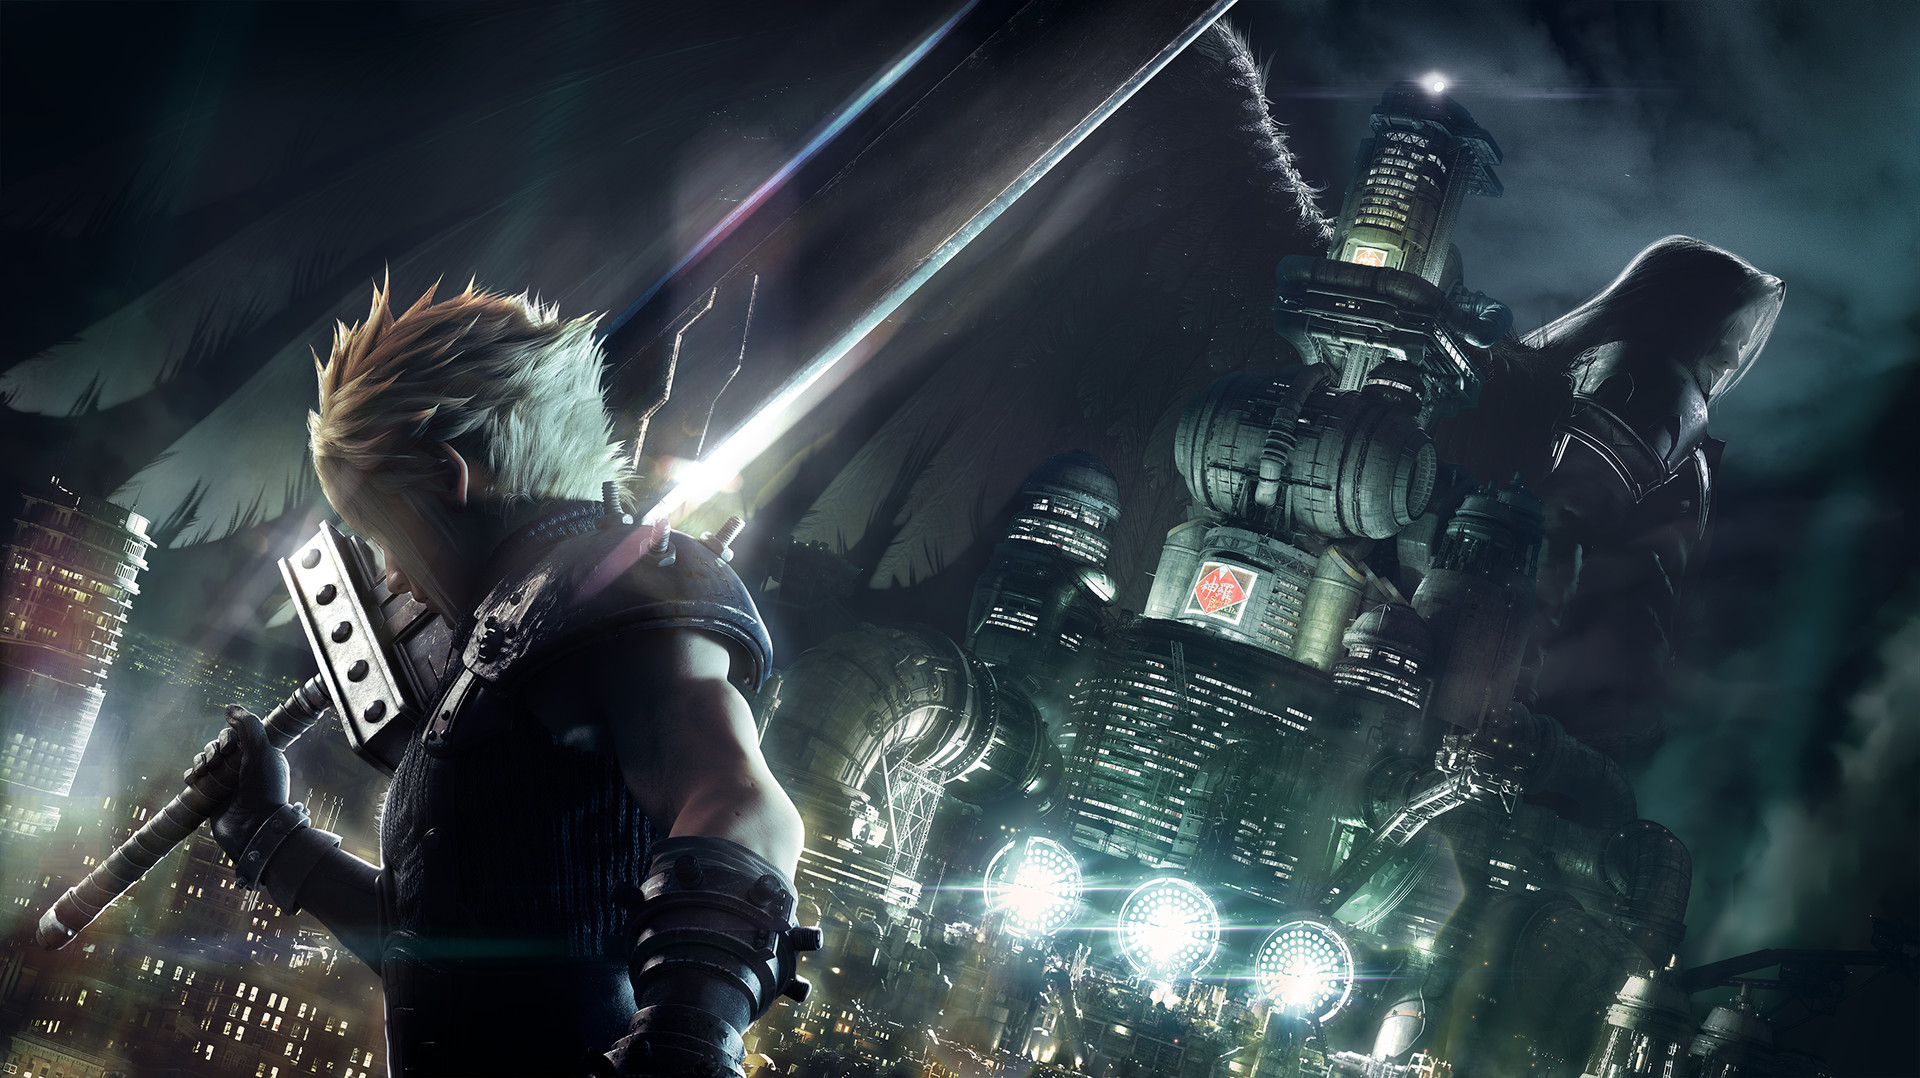 [Rumor] Final Fantasy VII Remake and Alan Wake Remaster for PC appear on Epic Games Store backend